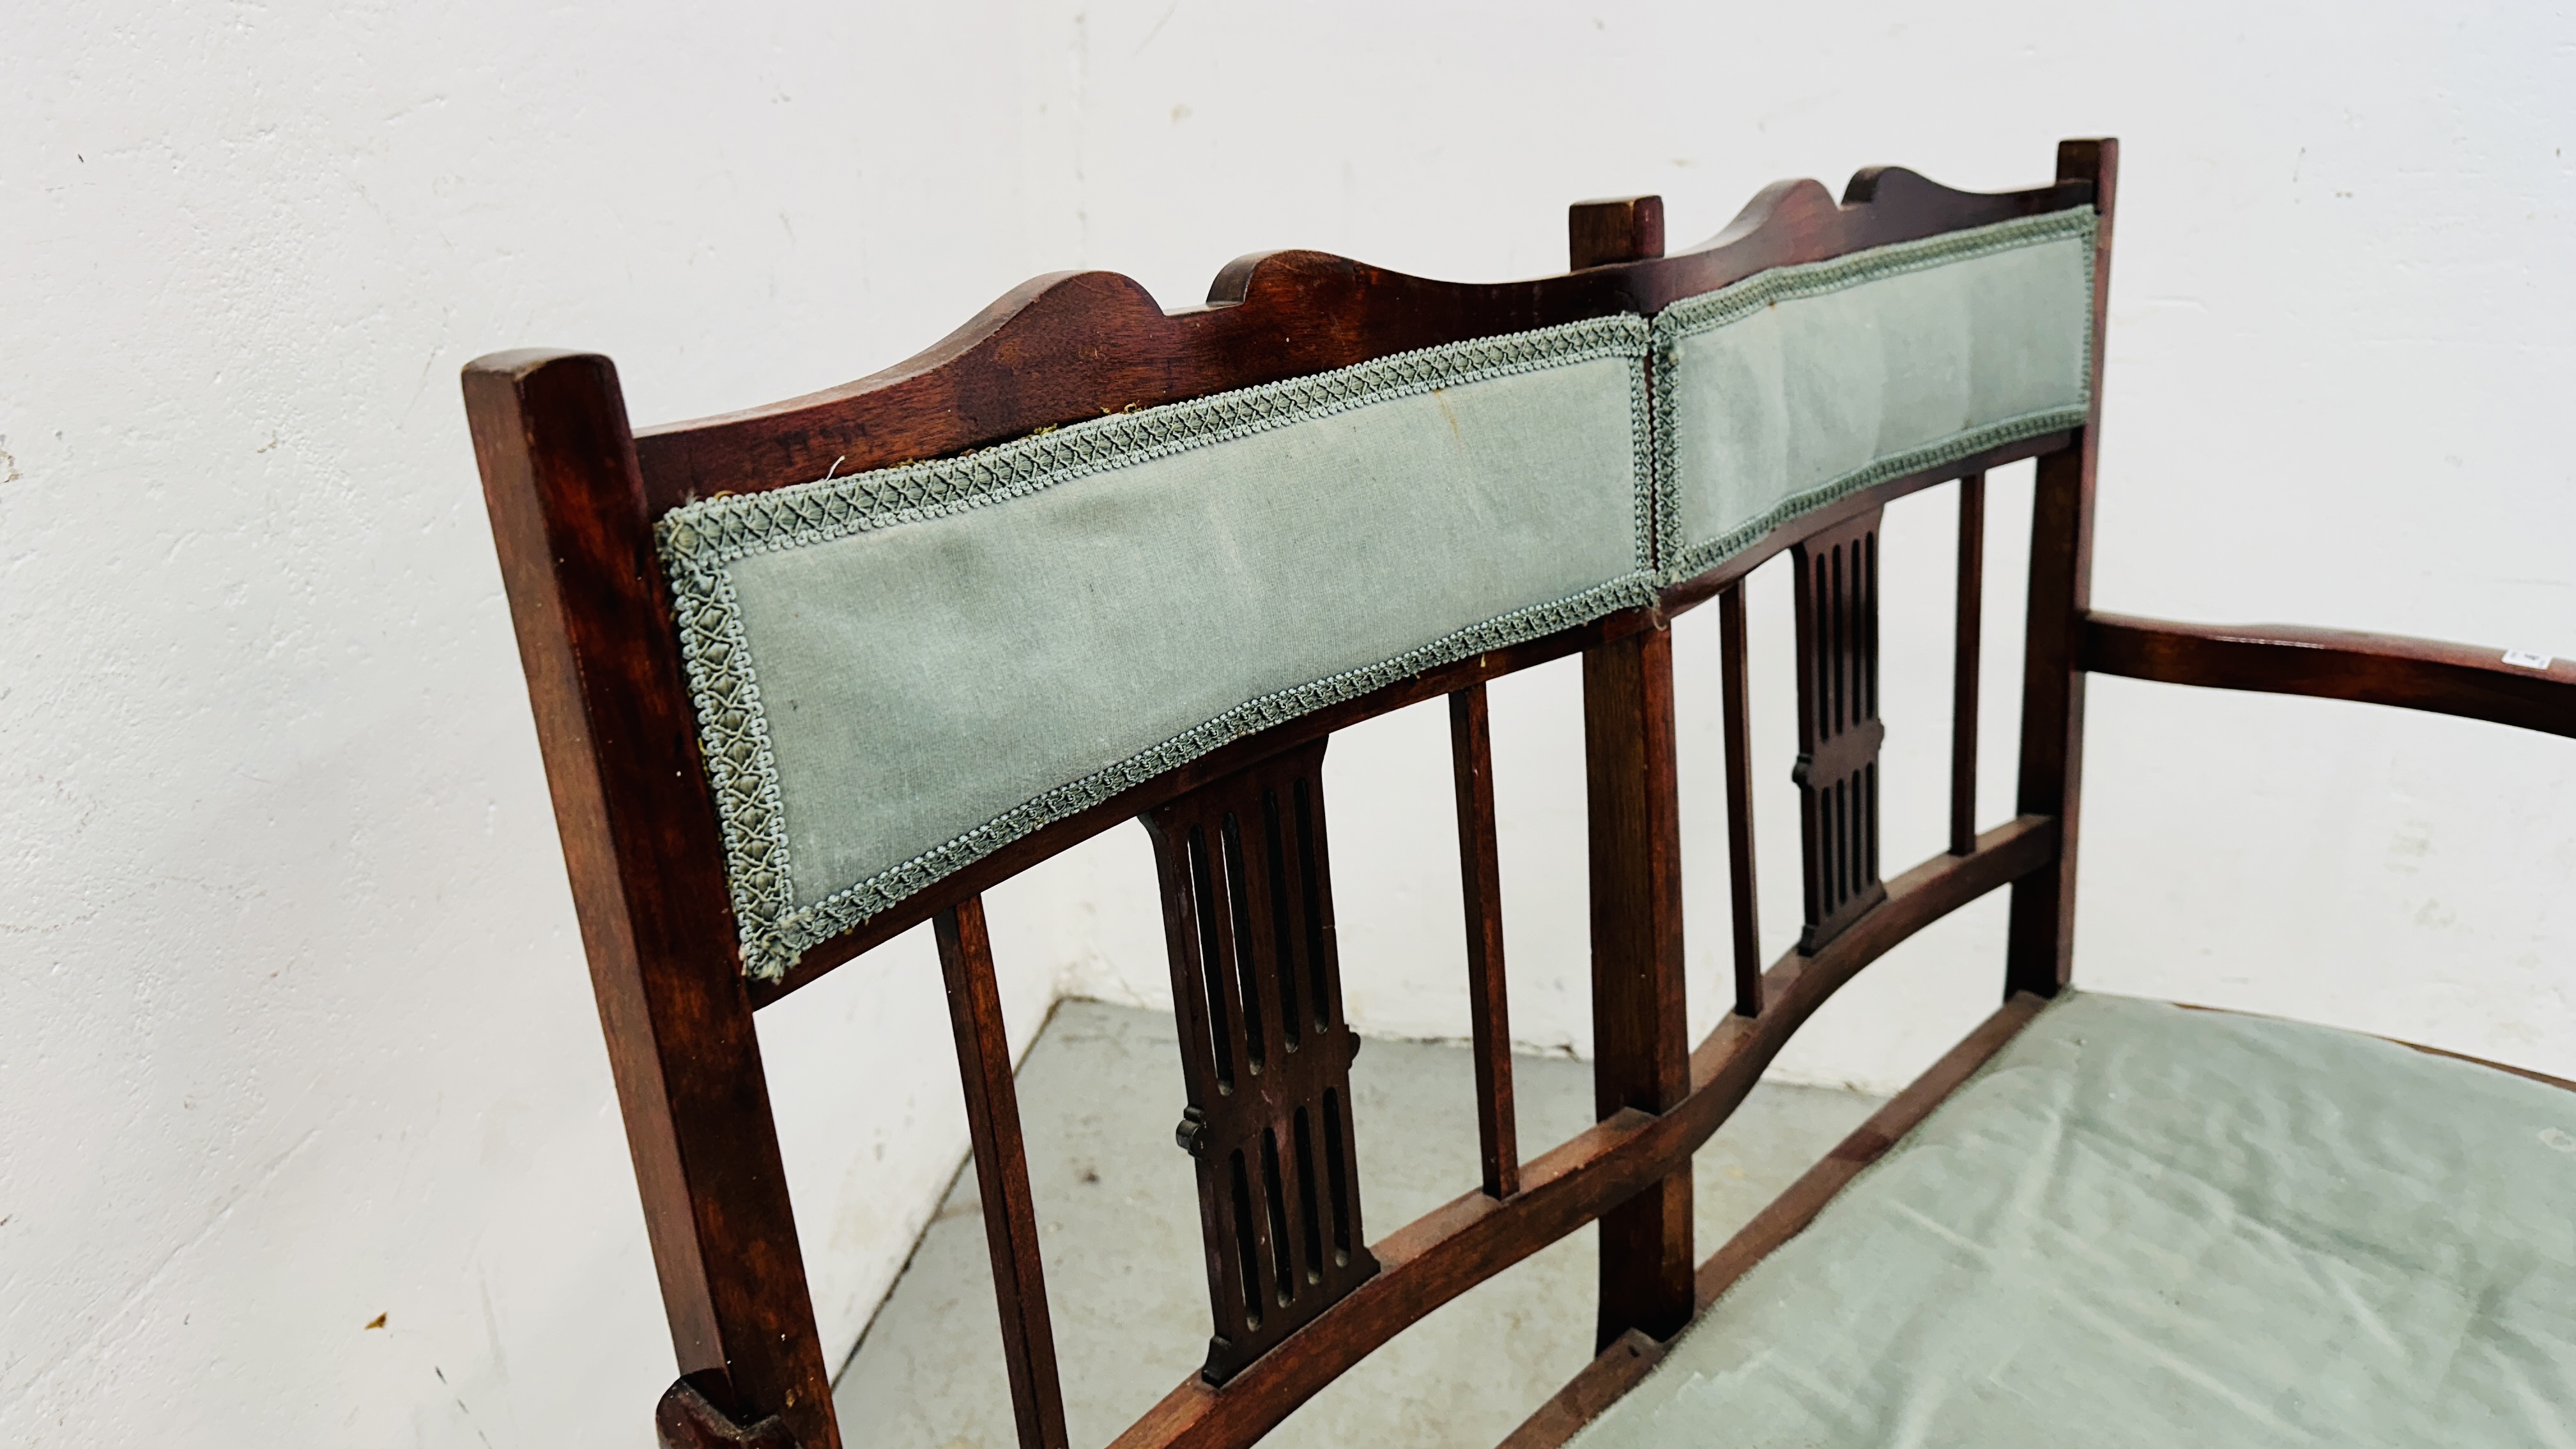 EDWARDIAN MAHOGANY 2 SEAT SOFA WITH FRETT WORK SUPPORT BACK AND GREEN UPHOLSTERY. - Image 6 of 11